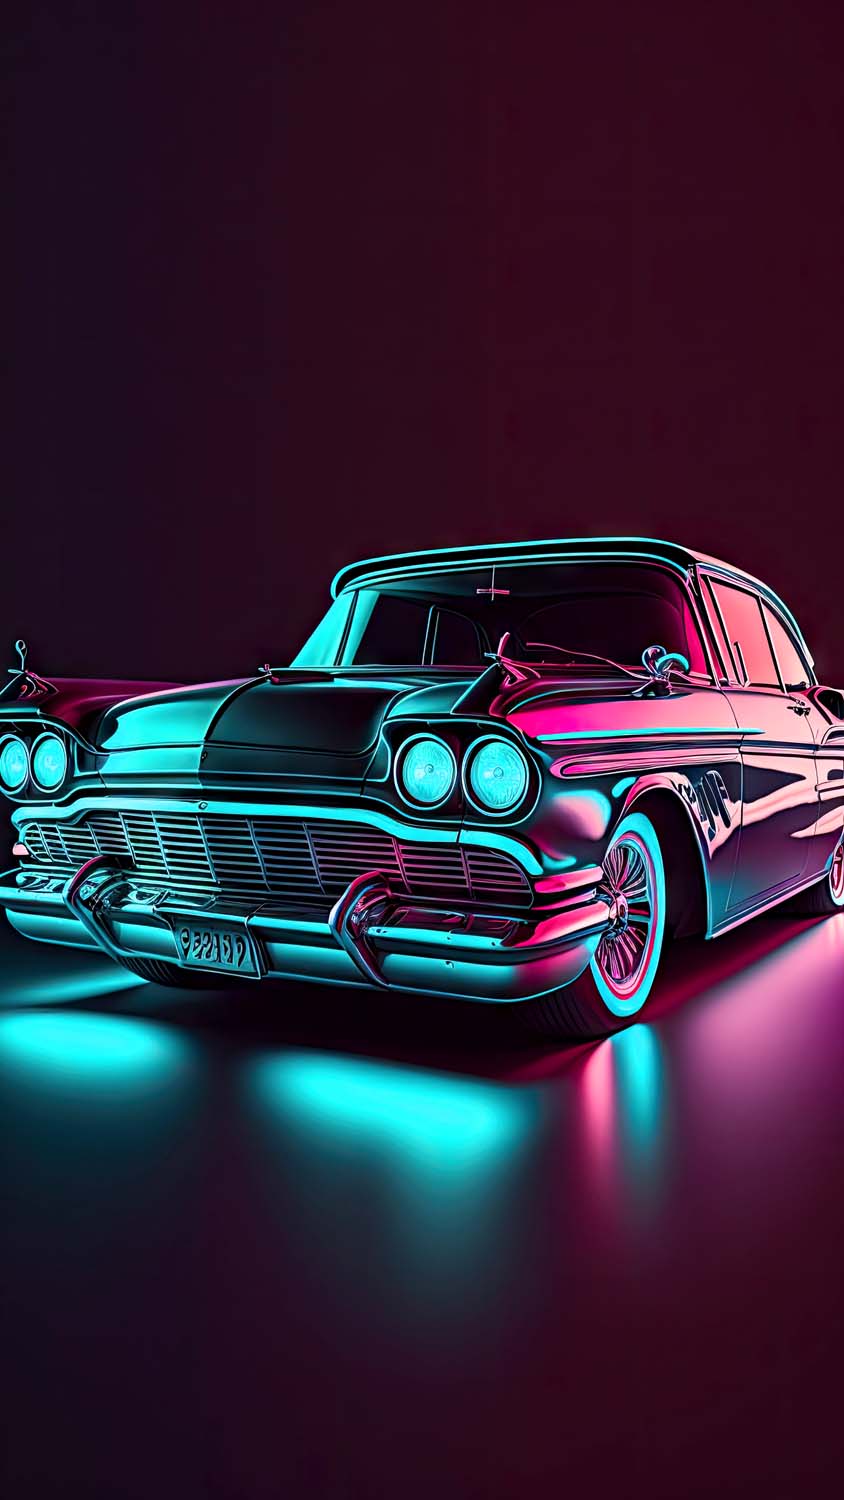 Neon Car Pictures | Download Free Images on Unsplash